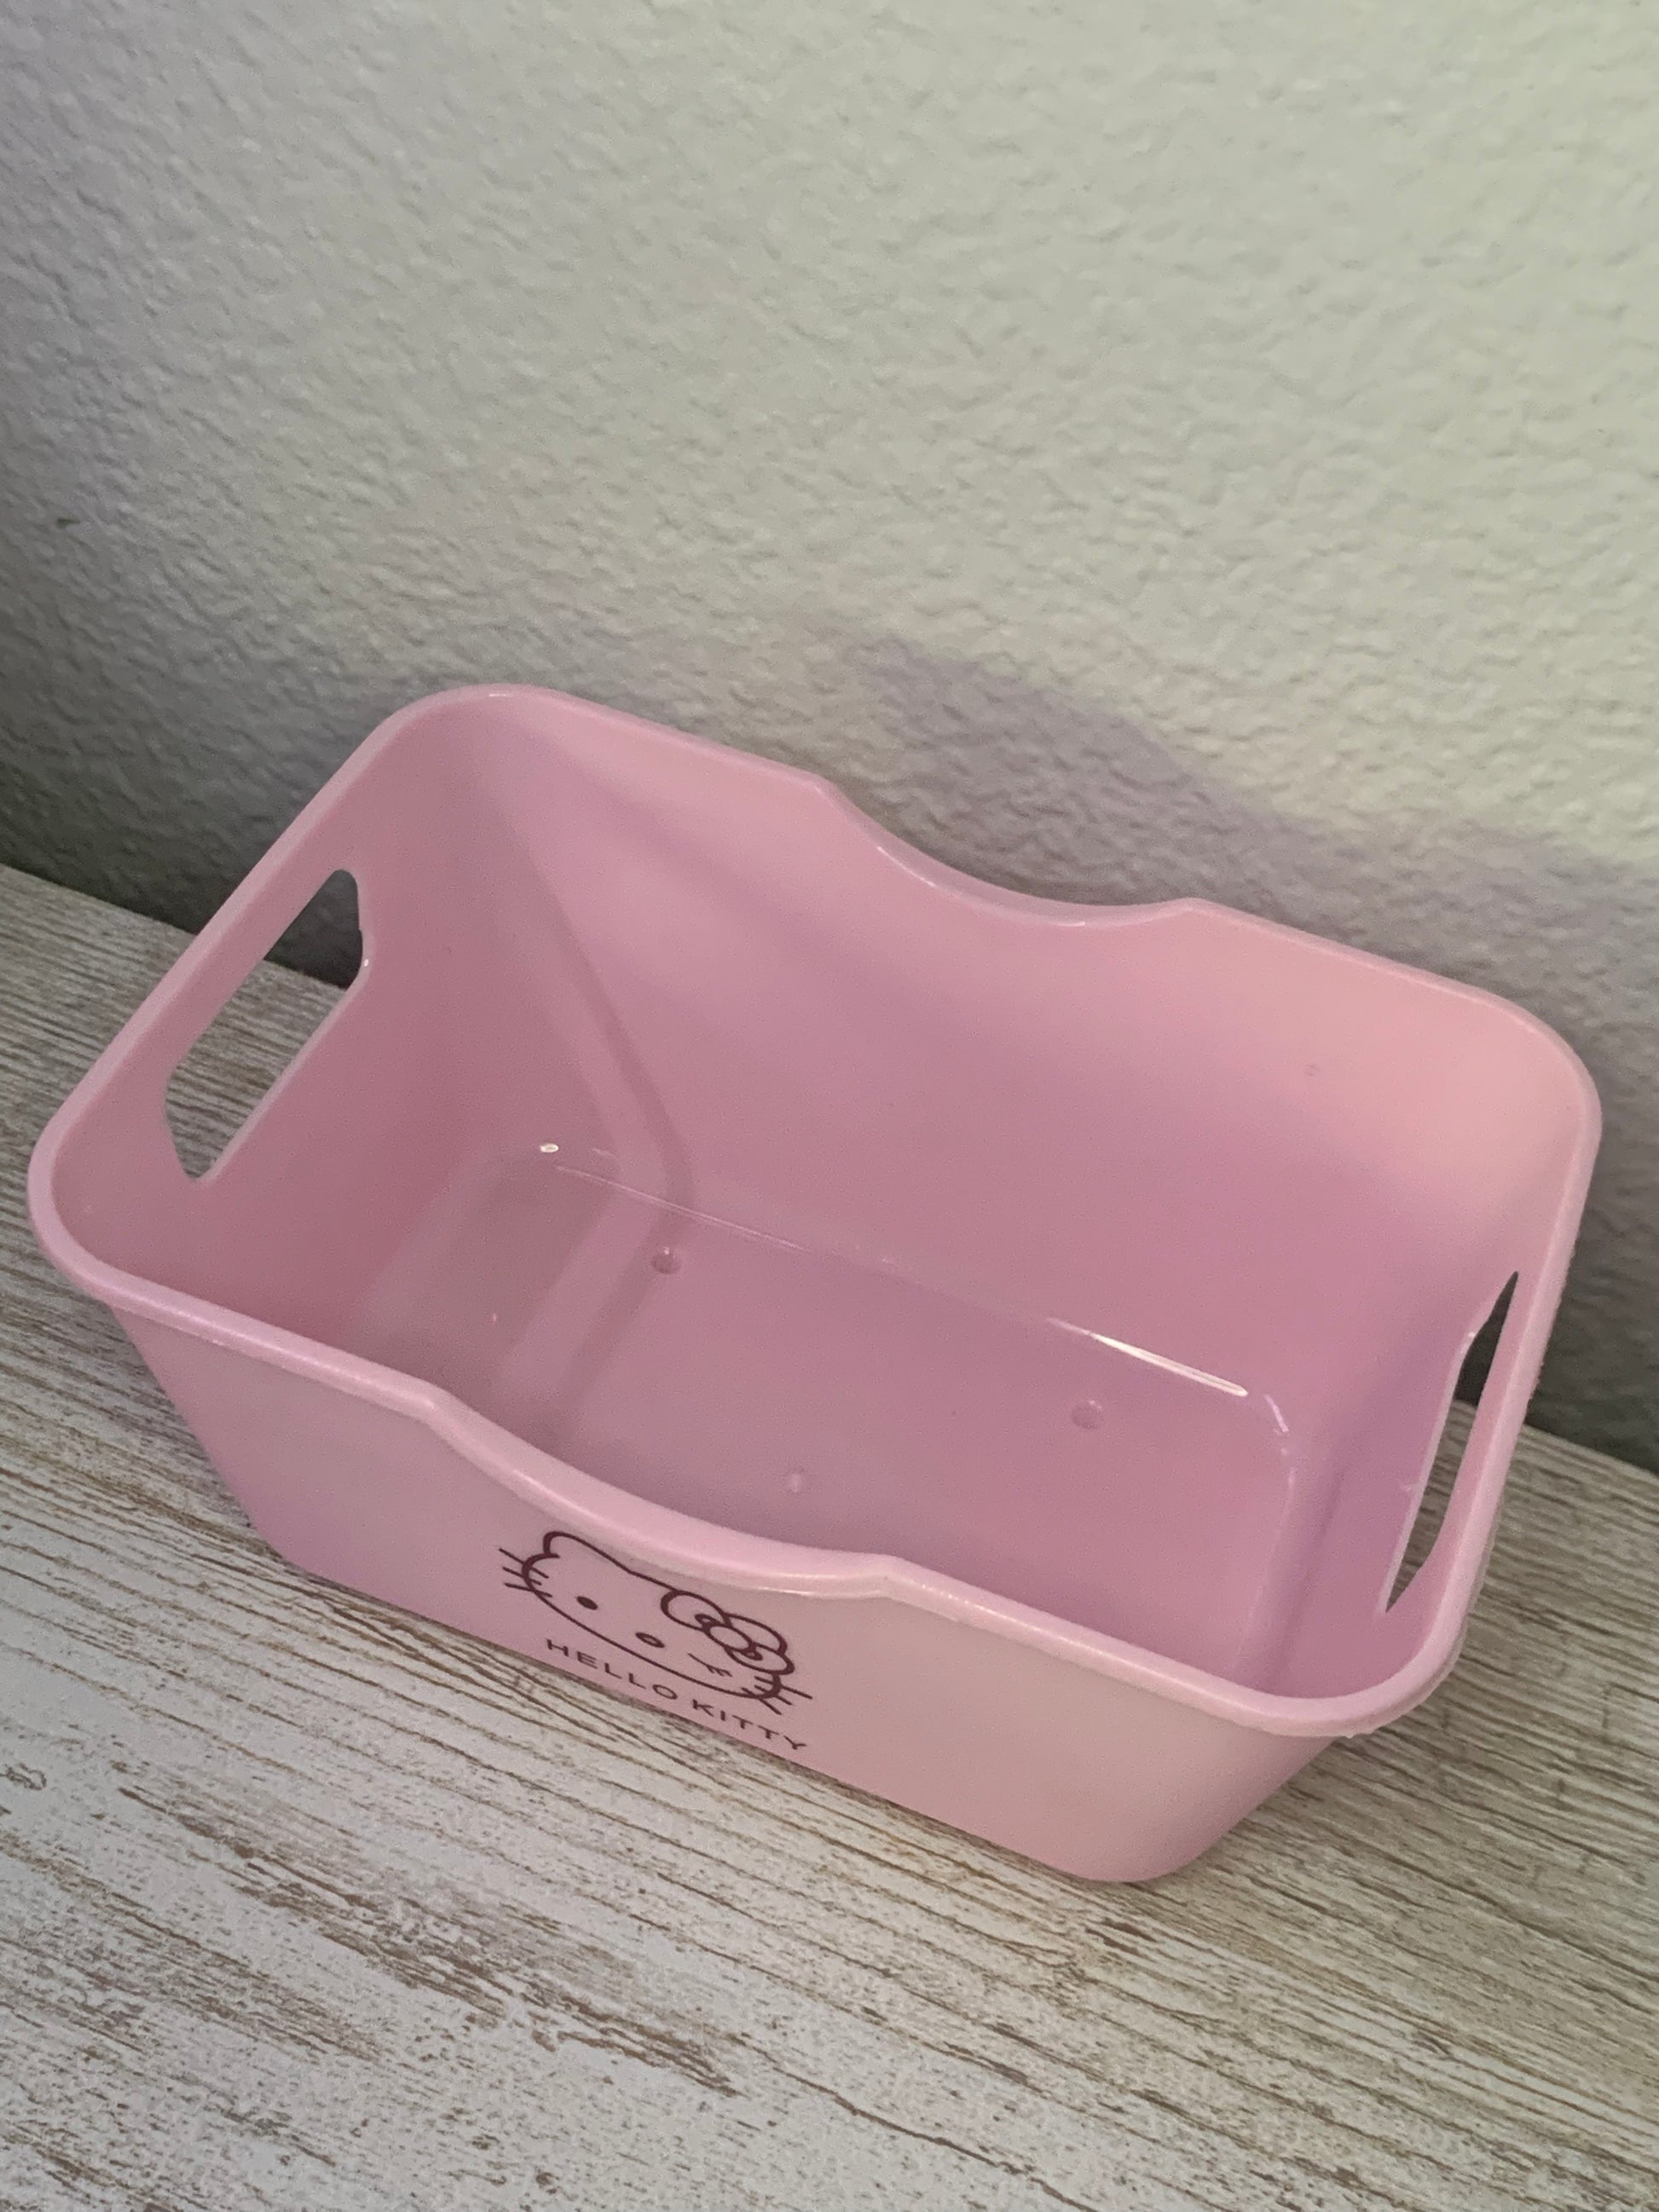 Self Storage Containers - Pink Self Storage